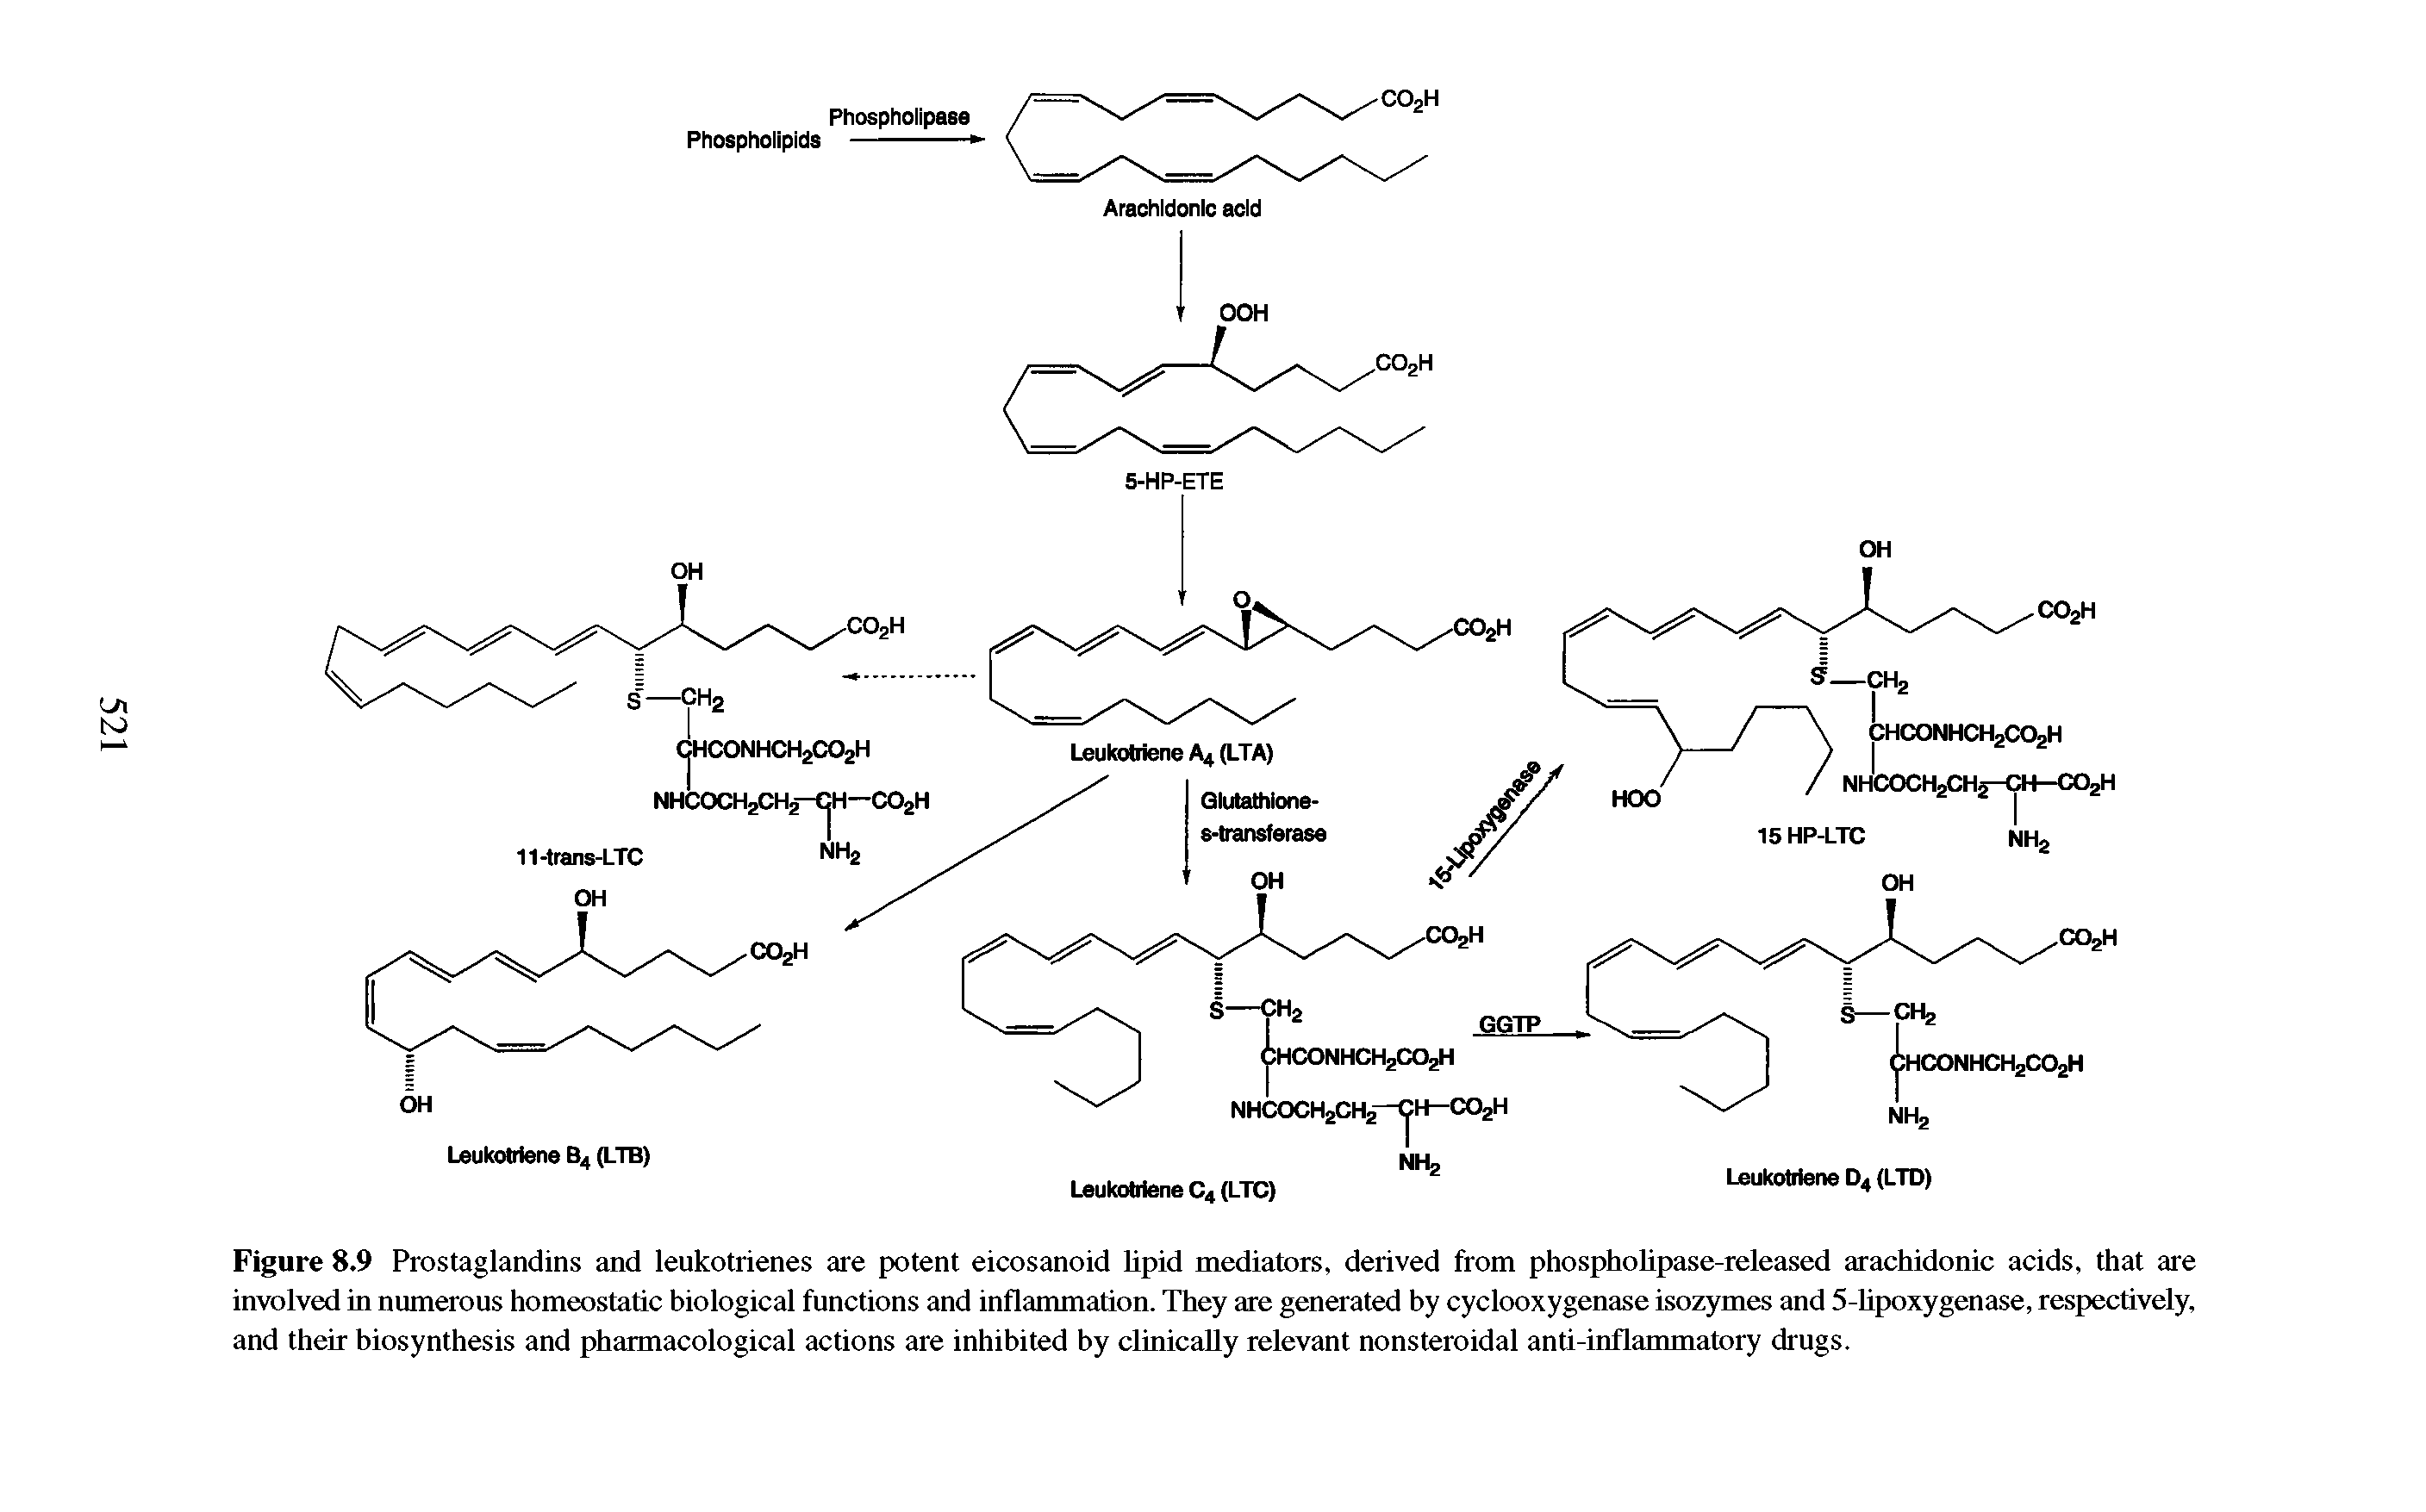 Figure 8.9 Prostaglandins and leukotrienes are potent eicosanoid lipid mediators, derived from phospholipase-released arachidonic acids, that are involved in numerous homeostatic biological functions and inflammation. They are generated by cyclooxygenase isozymes and 5-lipoxygenase, respectively, and their biosynthesis and pharmacological actions are inhibited by clinically relevant nonsteroidal anti-inflammatory drugs.